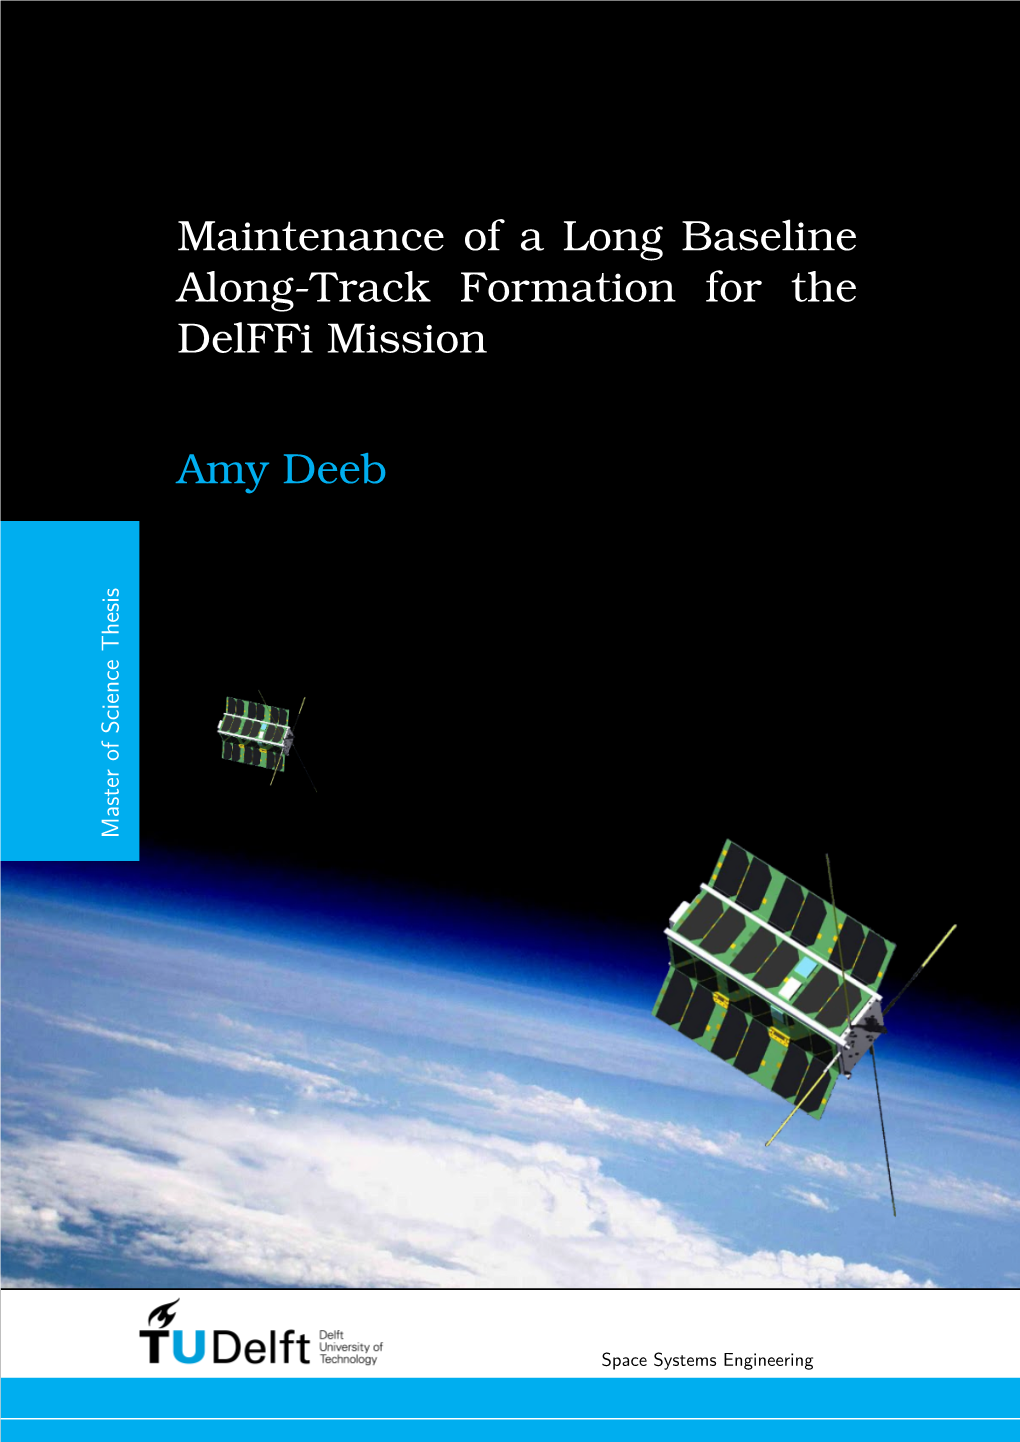 Masters Thesis: Maintenance of a Long Baseline Along-Track Formation for the Delffi Mission